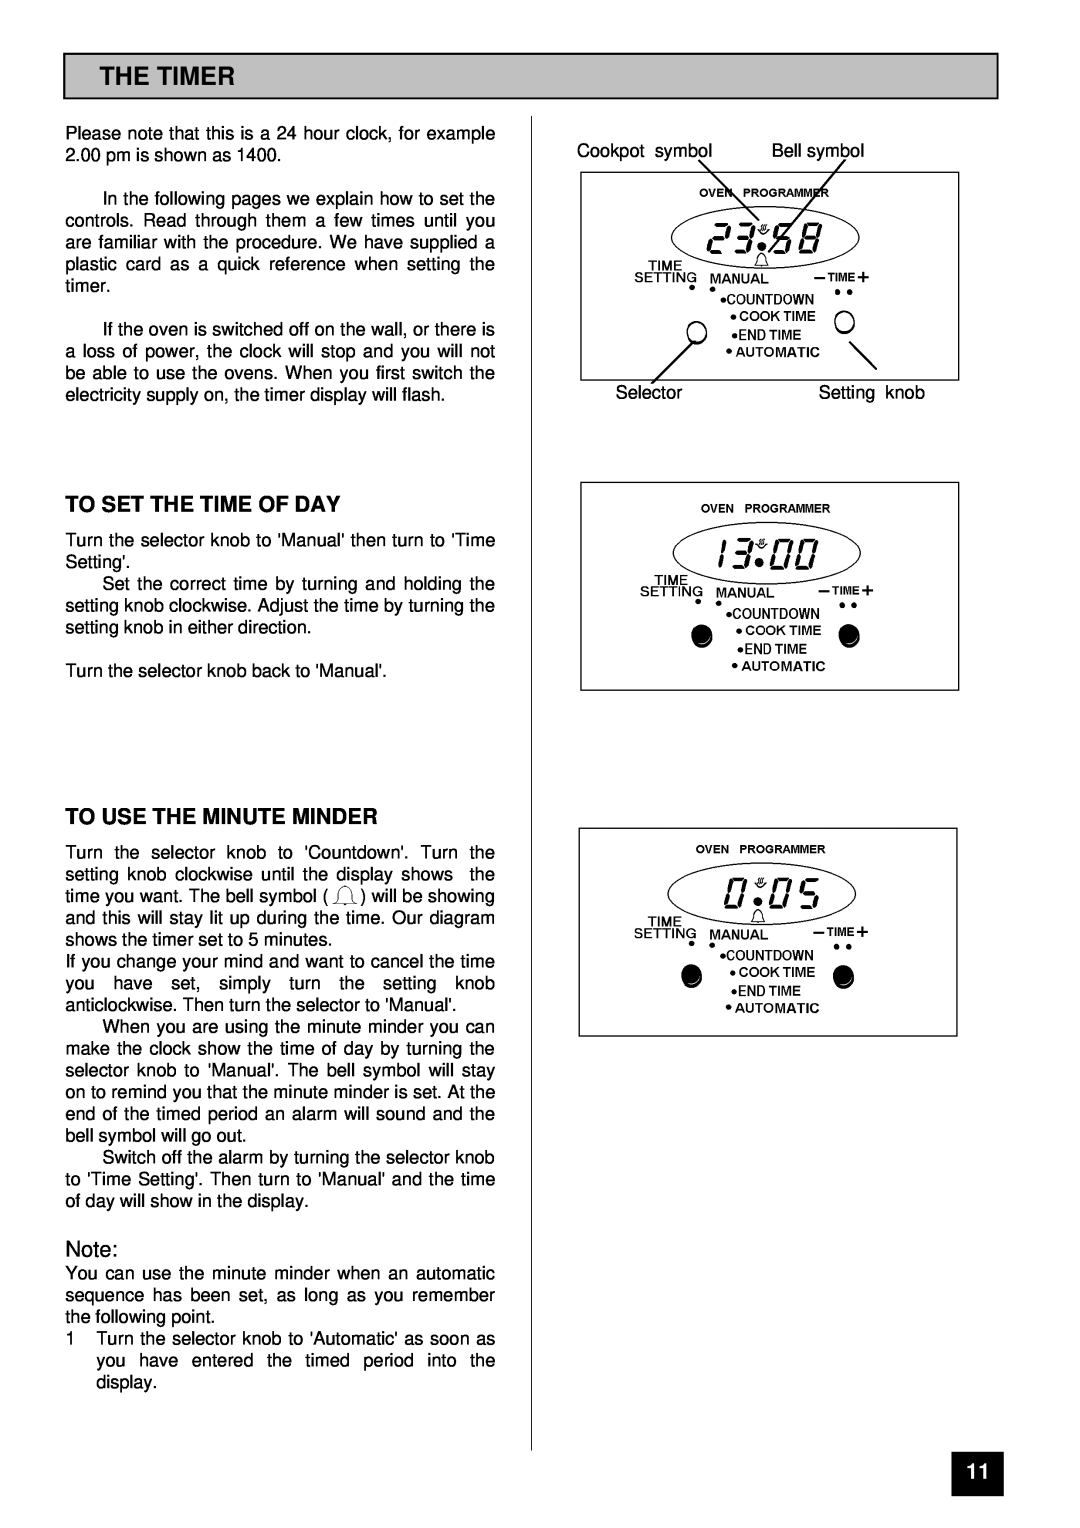 Tricity Bendix SIE 459 installation instructions The Timer, To Set The Time Of Day, To Use The Minute Minder 